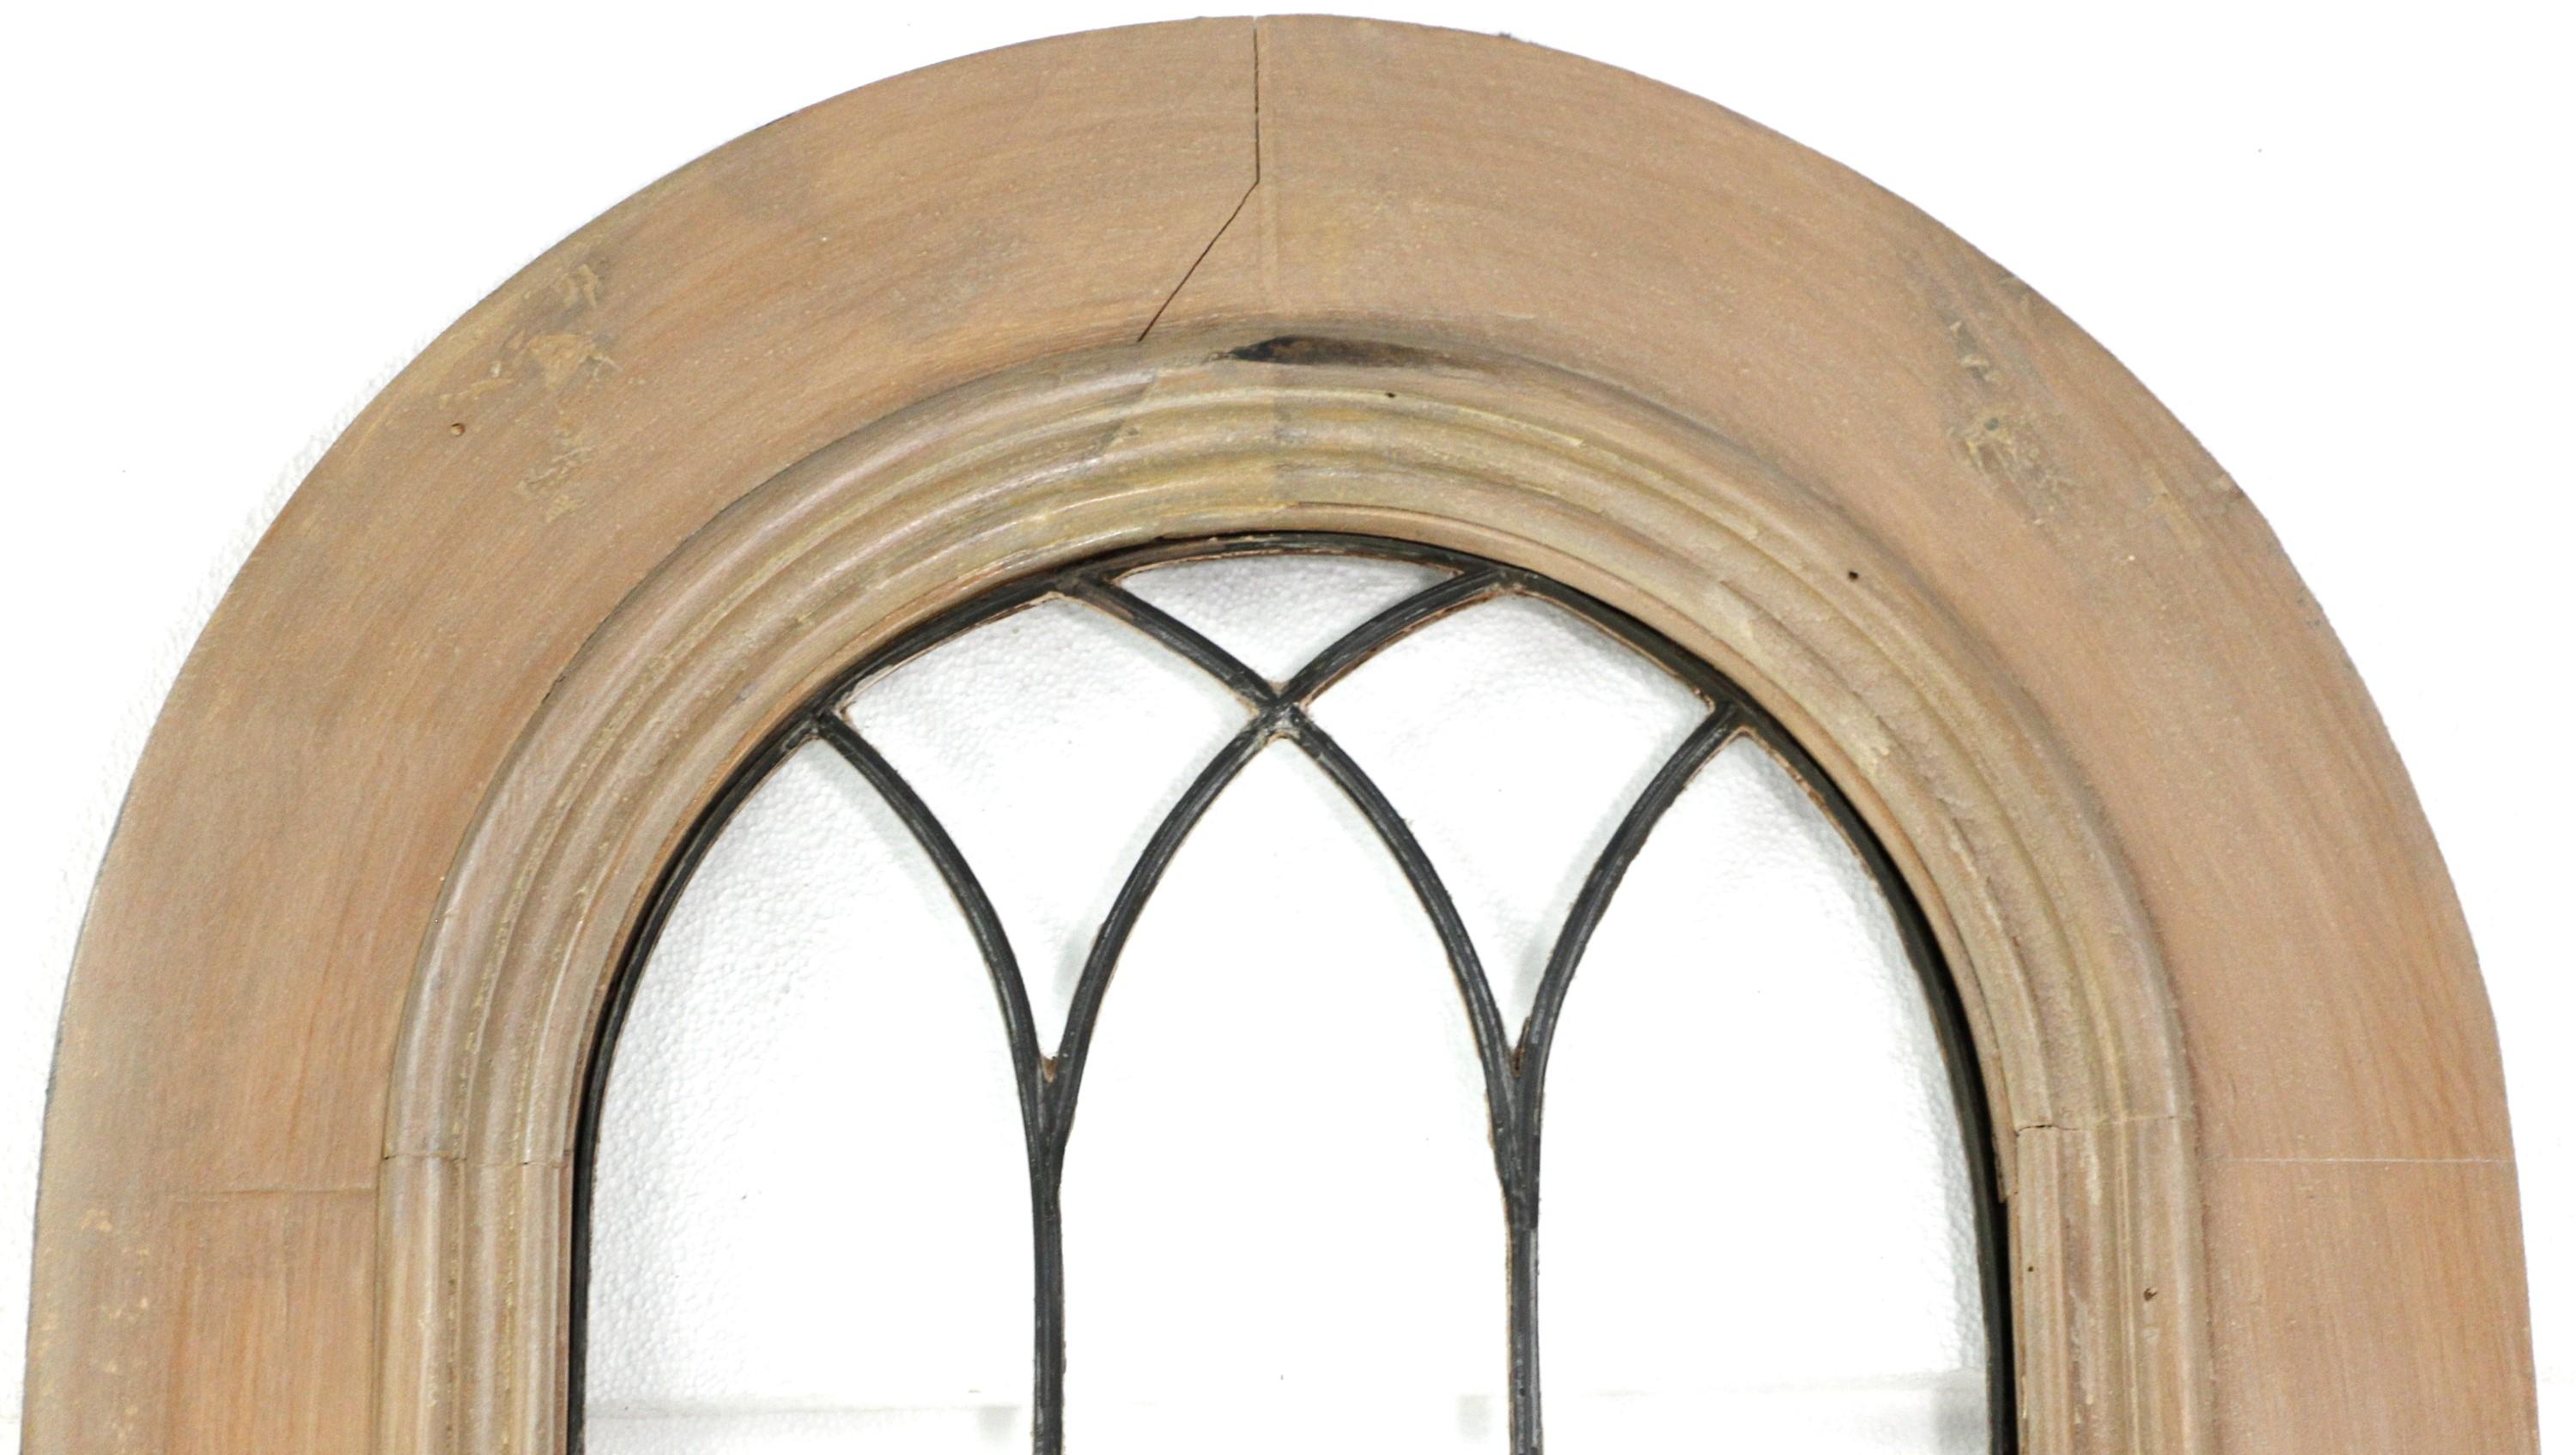 20th century wood door featuring an arched top and done in a light color stain. The window itself has 21 leaded clear glass panes. Bottom of the door features a single wood panel. Some chips and a large crack in the arched top of the wood frame.